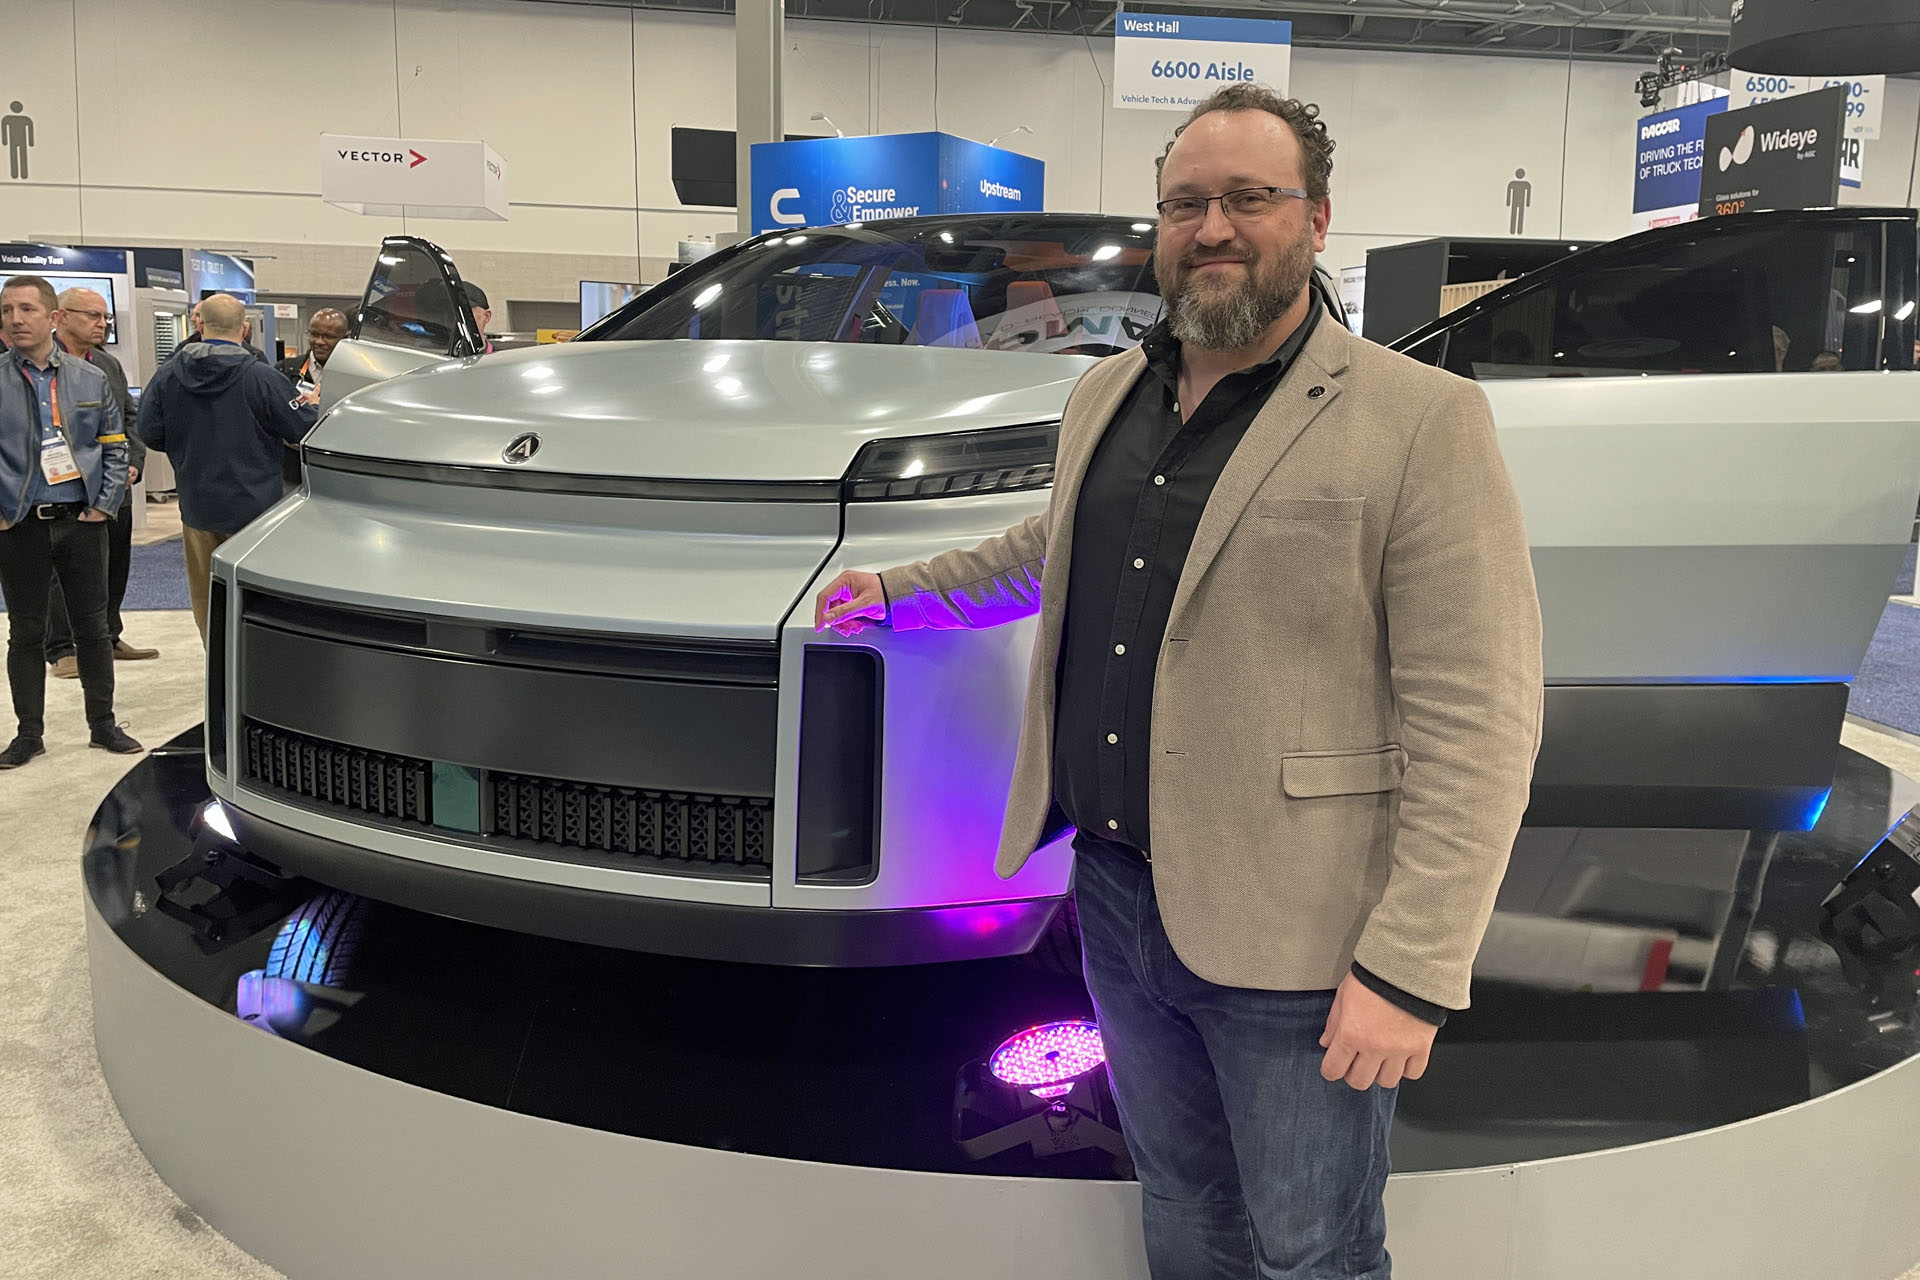 Flavio Volpe, president of the Automotive Parts and Manufacturing Association (APMA), and the Project Arrow all-electric concept / Graeme Fletcher, The Charge